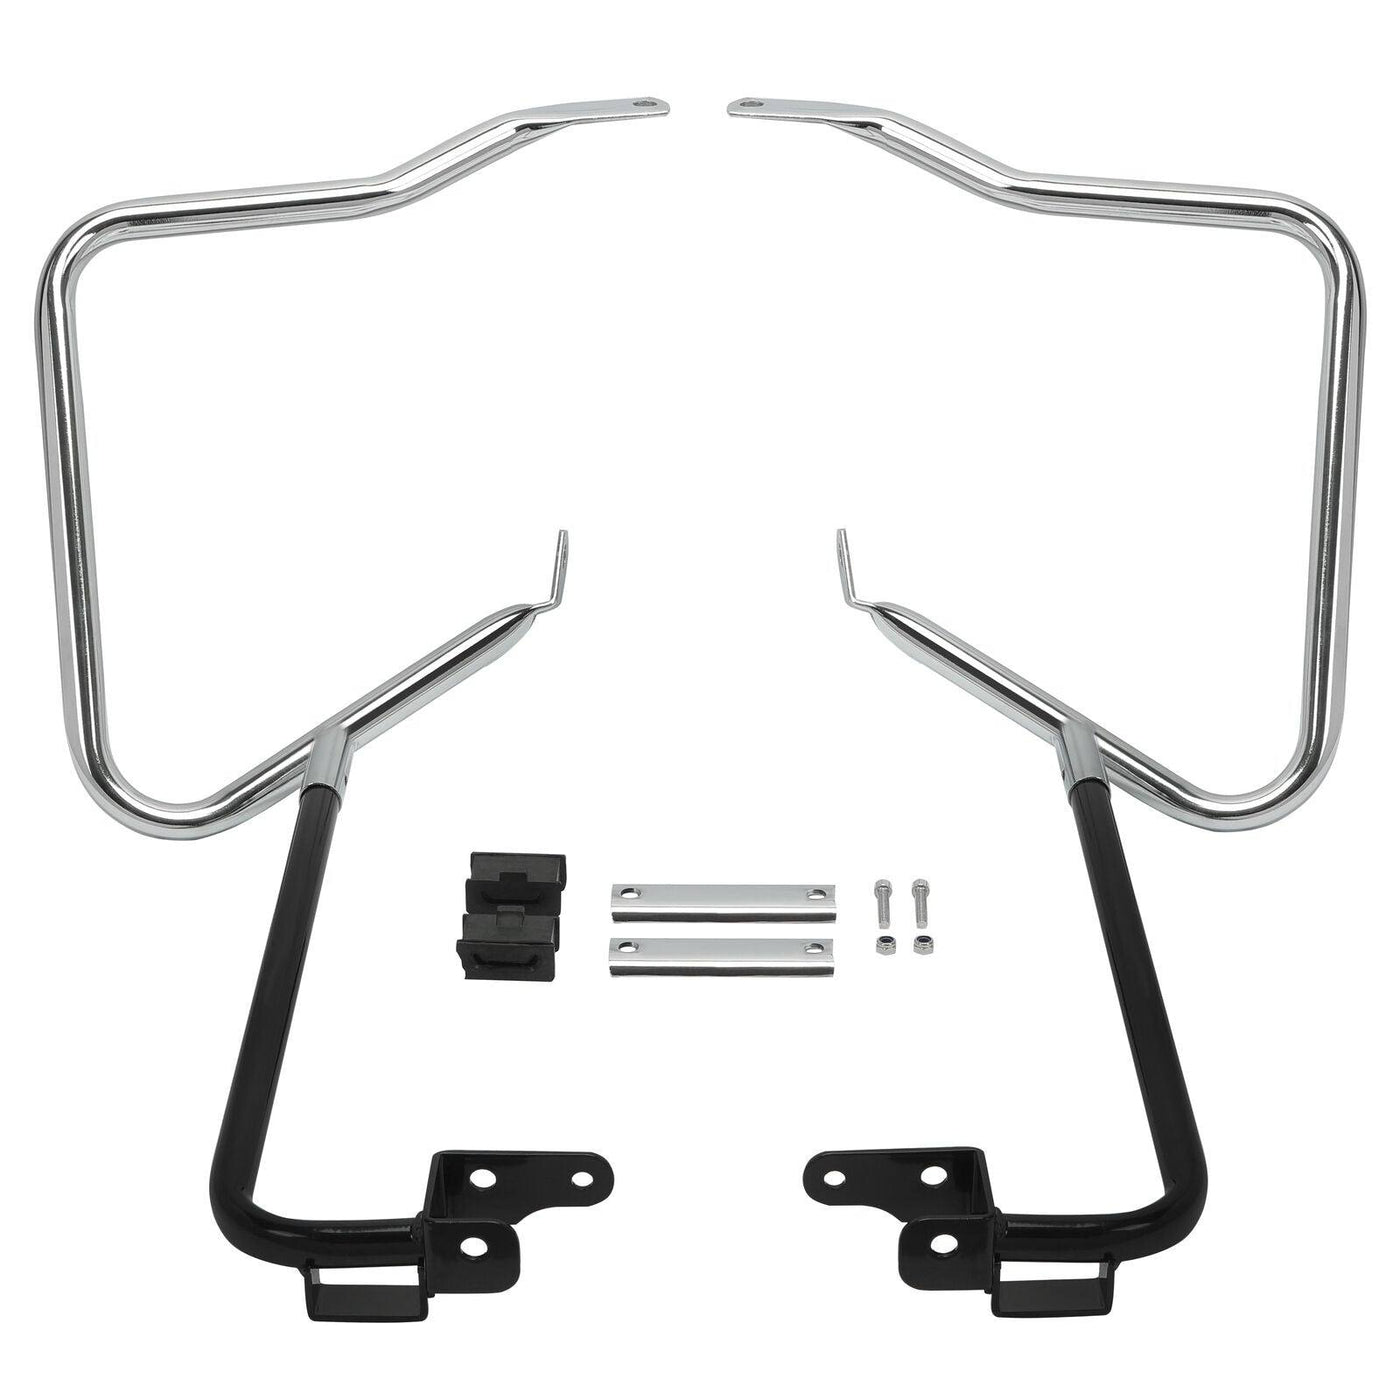 Rear Saddlebag Brackets Guard Bars Supports For 14-21 Harley Touring Models FLHX - Moto Life Products